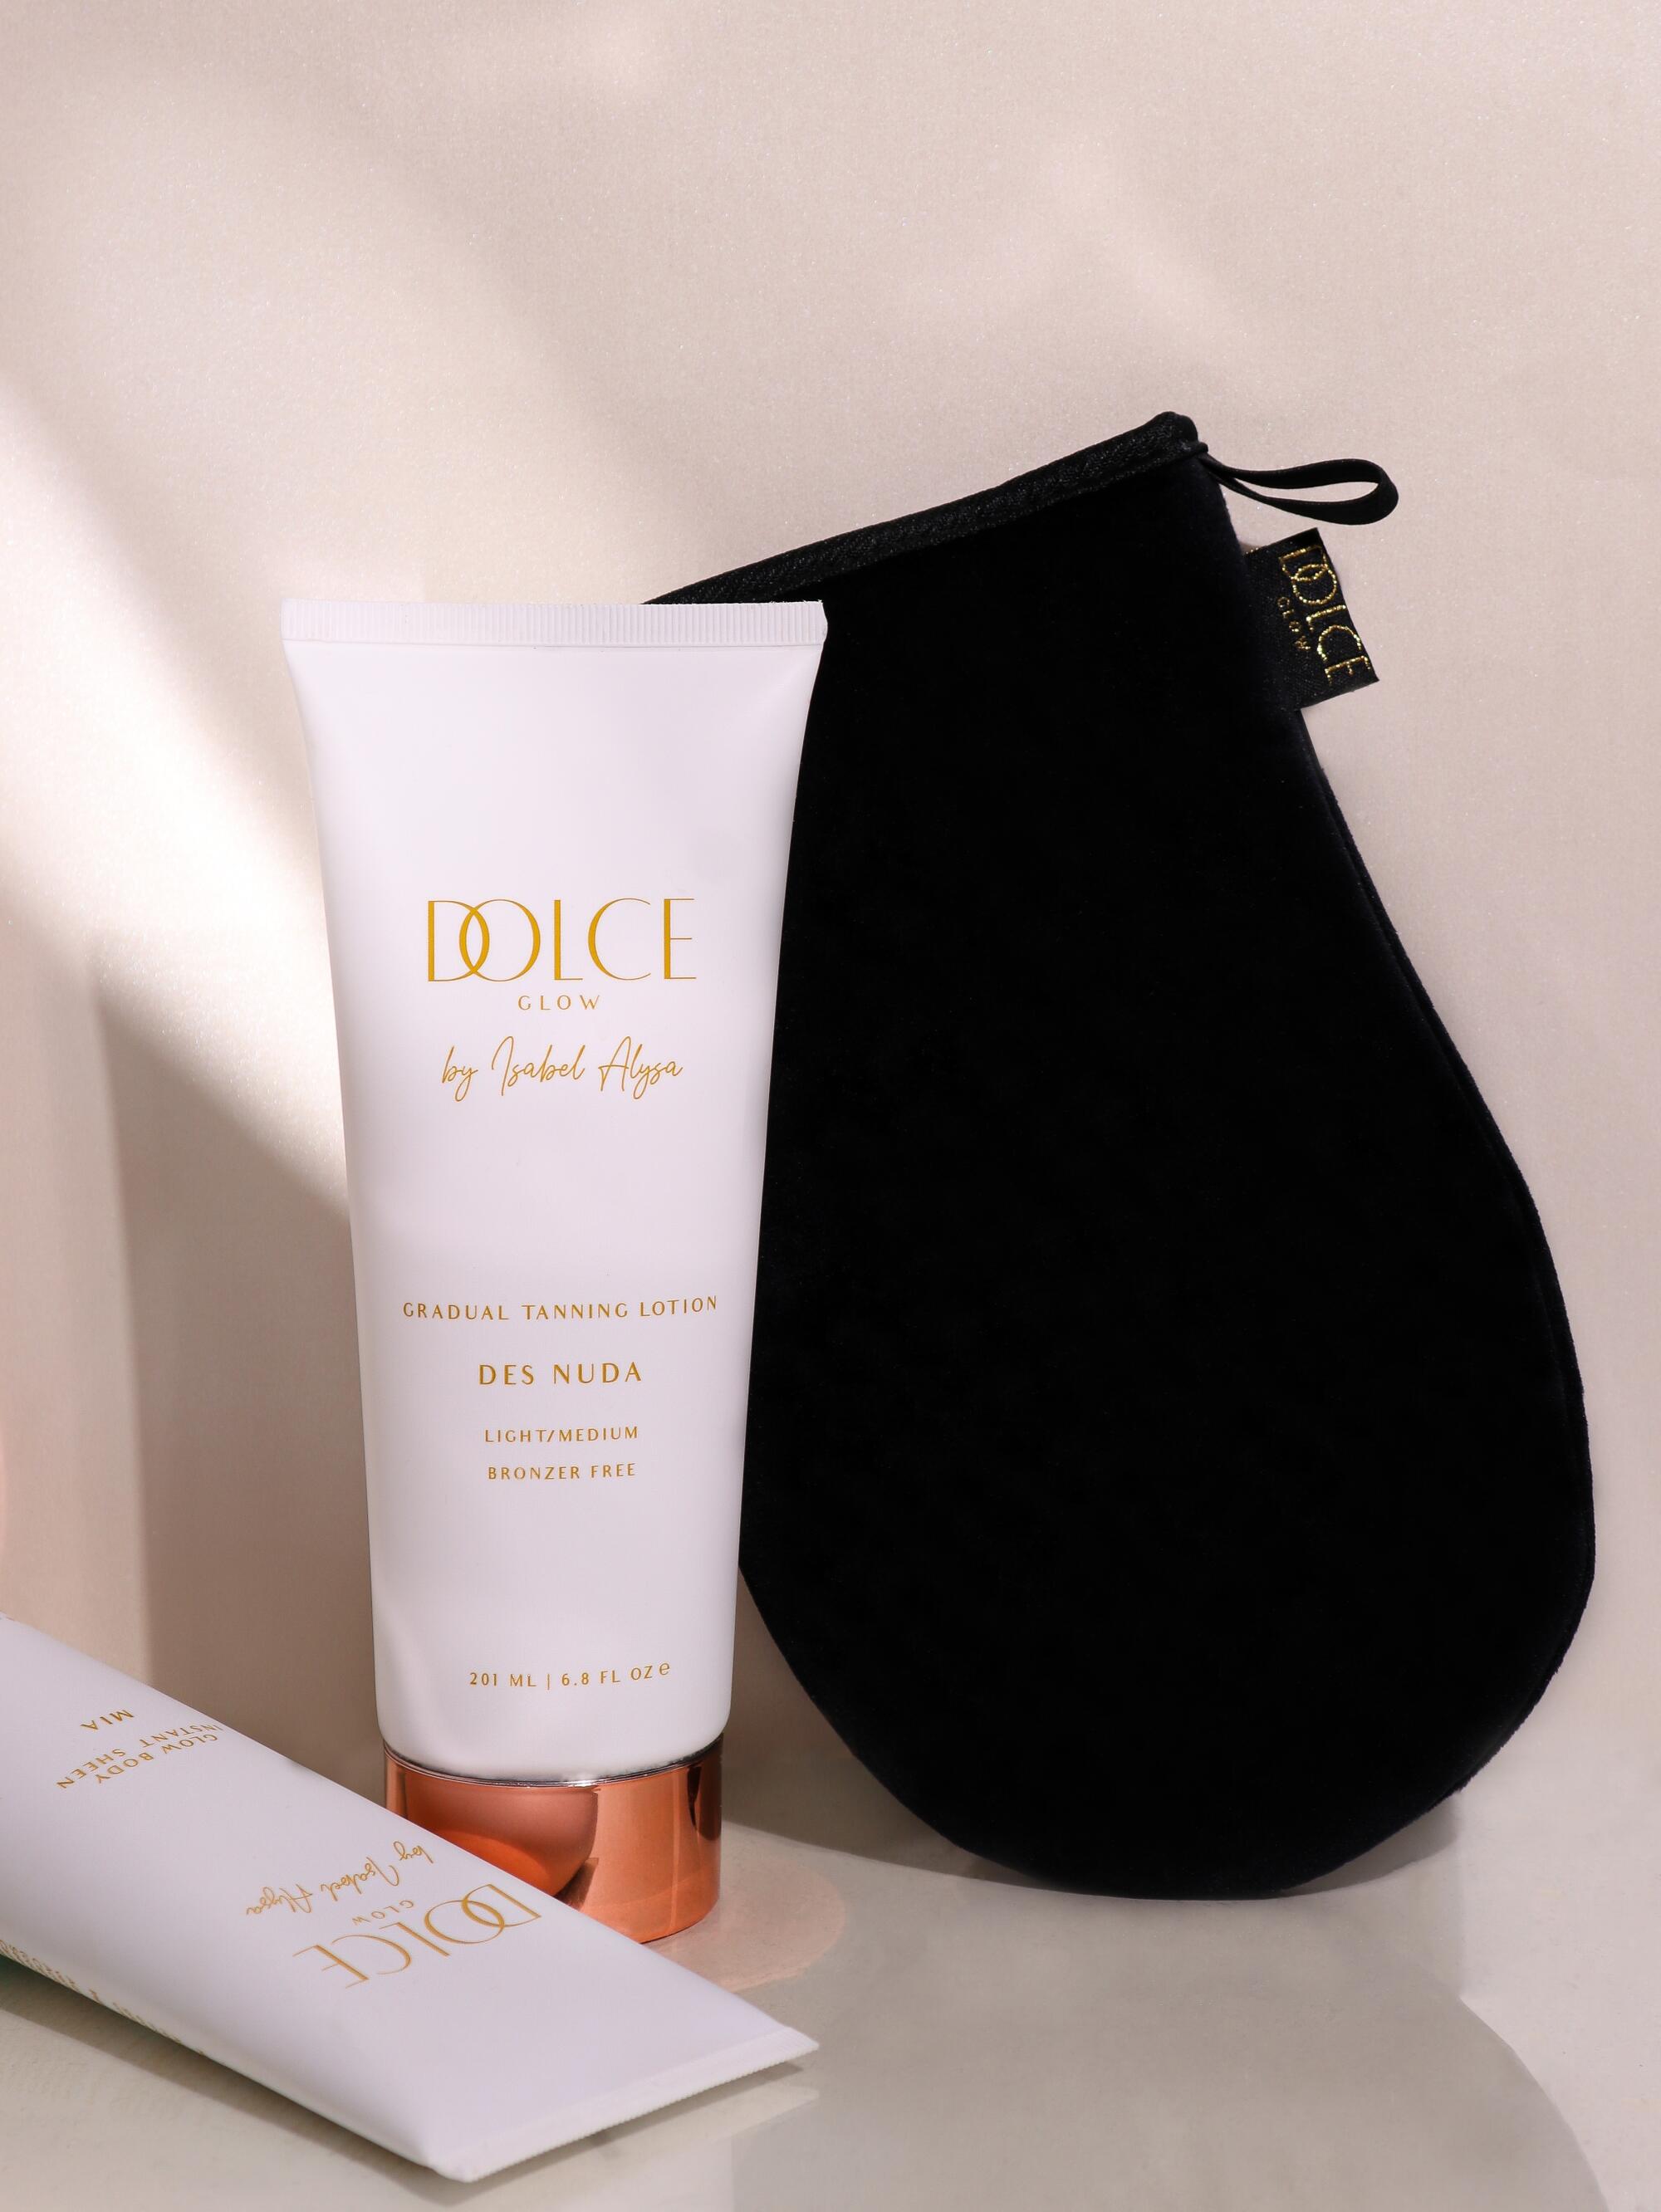 Dolce Glow products